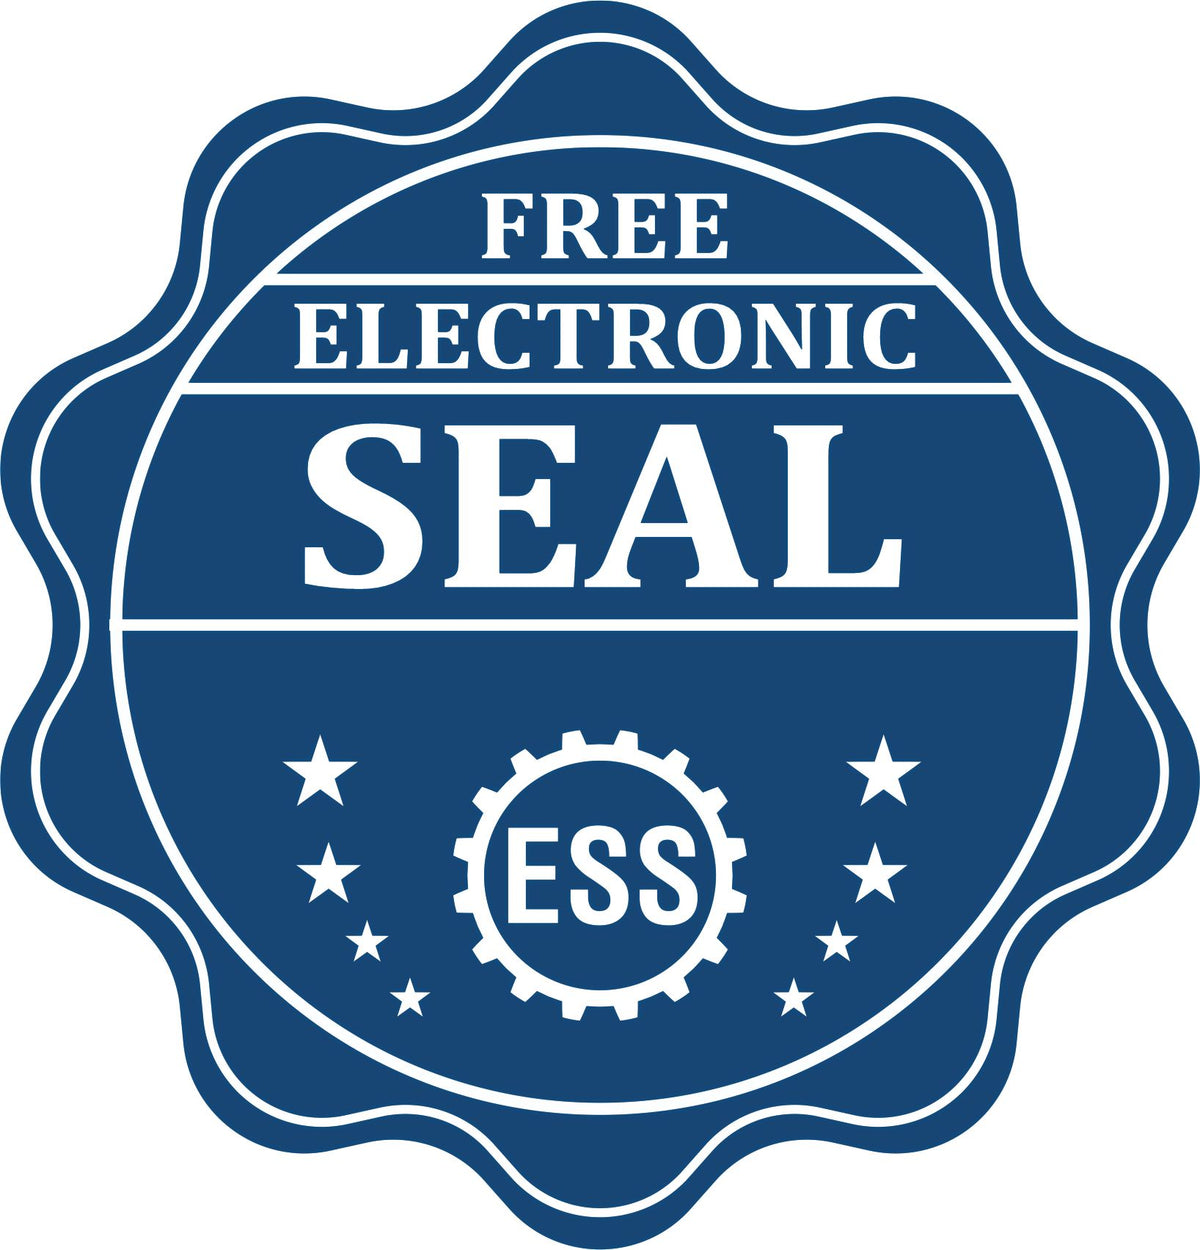 A badge showing a free electronic seal for the MaxLight Premium Pre-Inked Maryland Rectangular Notarial Stamp with stars and the ESS gear on the emblem.